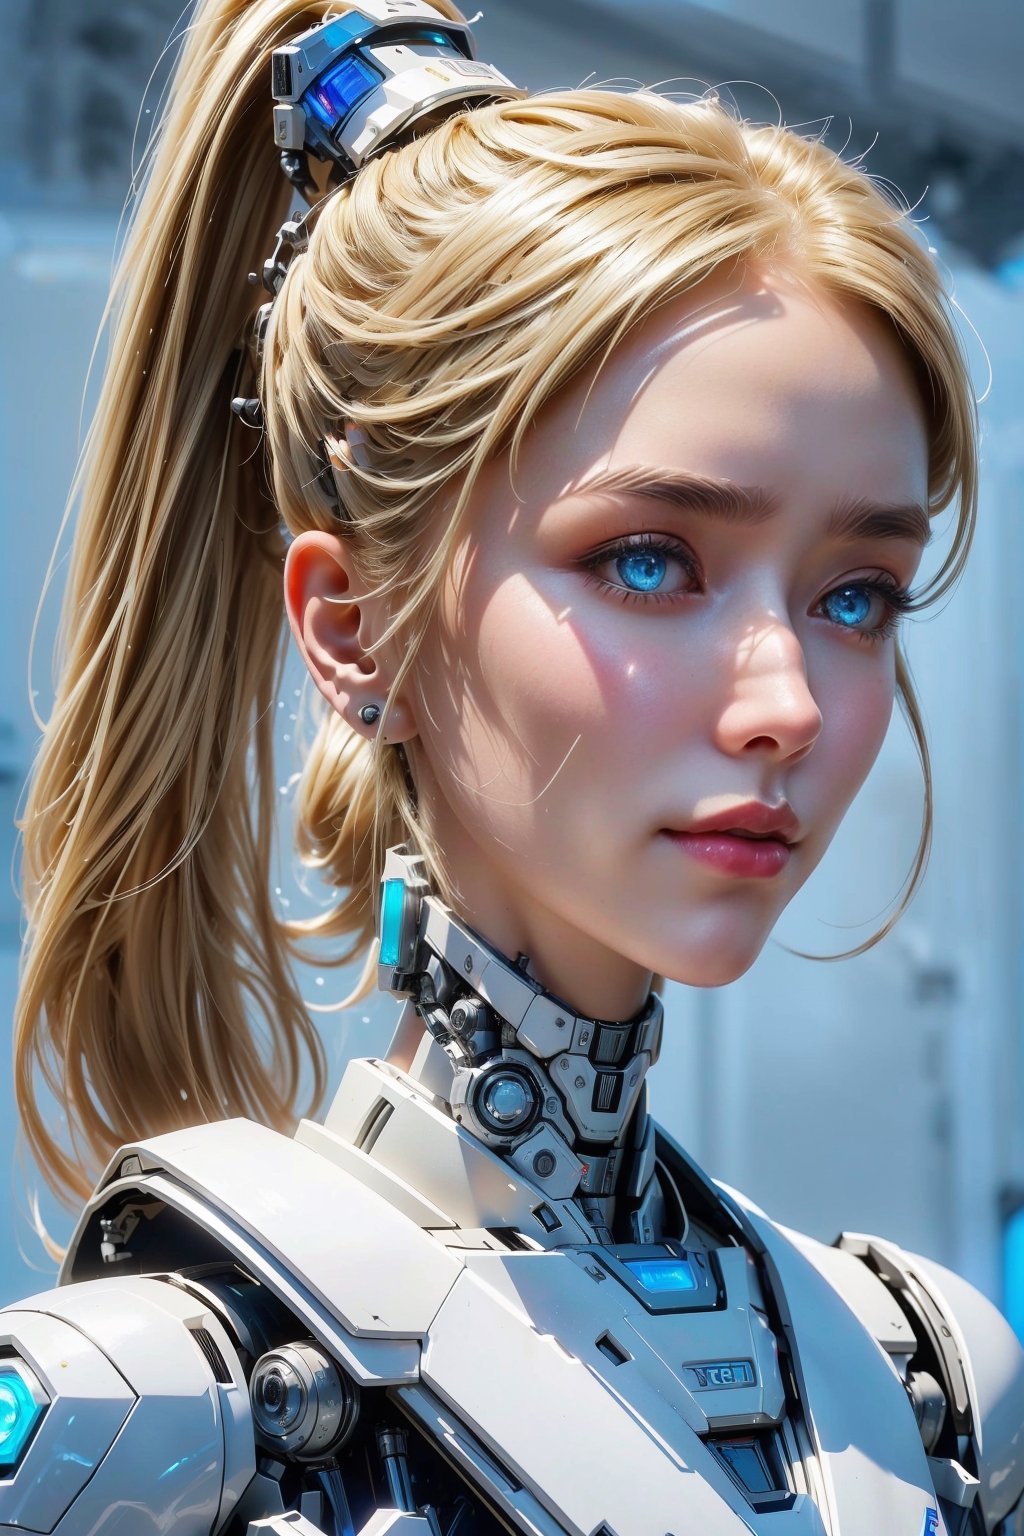 ((high resolution)), ((8K)), ((incredibly absurdres)), break. ((One android girl with archaic smile)), ((about 18 years old)), ((face close-up:1.5)), ((blonde ponytail hair:1.4)), break. ((in the cyberstyle city)), ((slender boby)), ((intricate internal structure)), ((brighten parts:1.3)), break. ((Her body is painted by chrome and light colors)), ((blue eyes:1.3)), break. ((robotic arms)), ((robotic legs)), ((robotic hands)), ((robotic joint:1.5)), break. Cinematic angle, ultra fine quality, masterpiece, best quality, incredibly absurdres, highly detailed, sharp focus, (photon mapping, radiosity, physically-based rendering, automatic white balance), masterpiece, best quality, Mecha body, furure_urban, incredibly absurdres, modelshoot style,Exquisite face